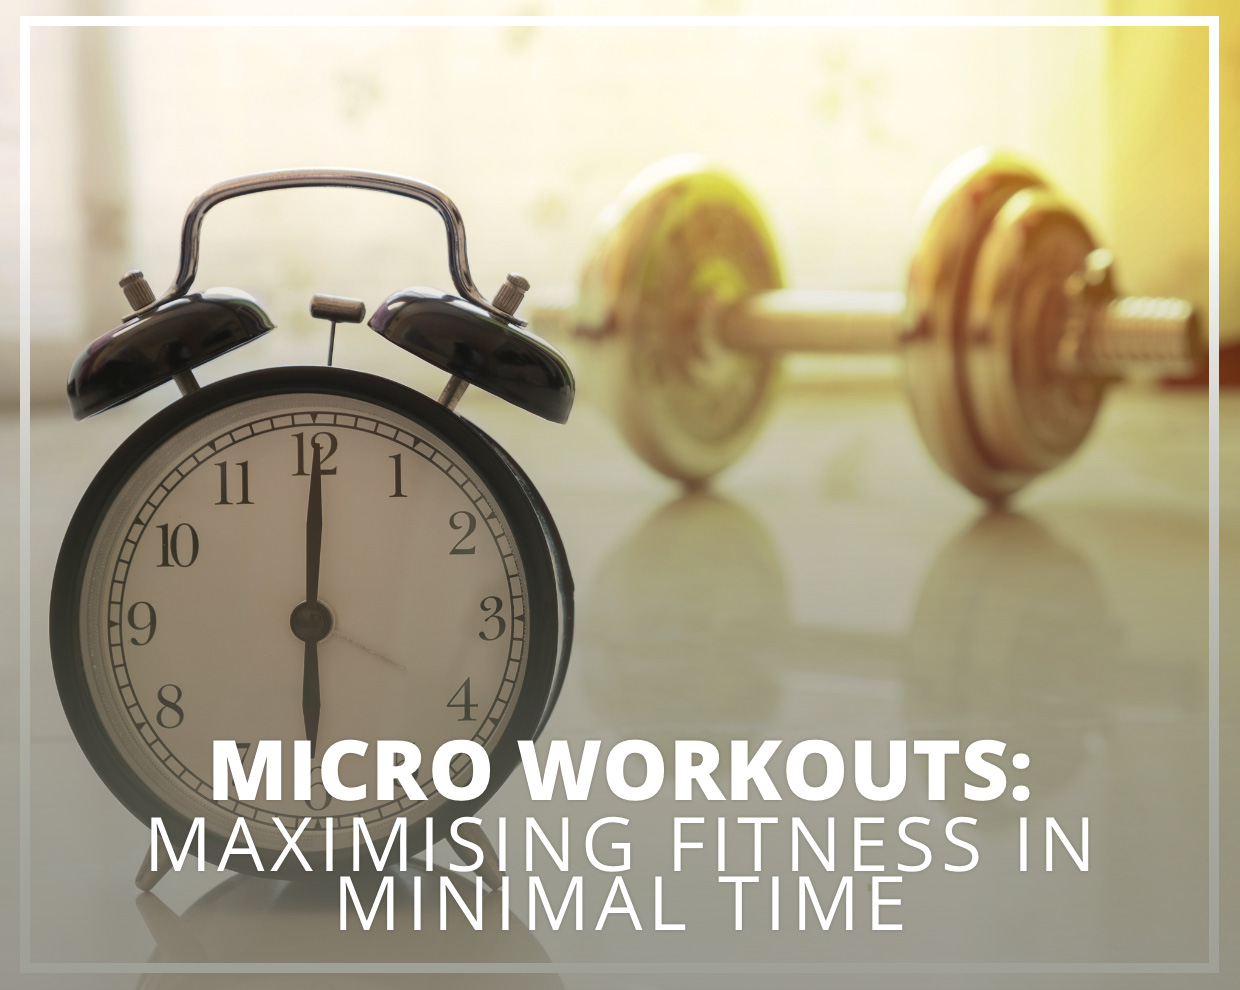 Micro Workouts: Maximising Fitness in Minimal Time